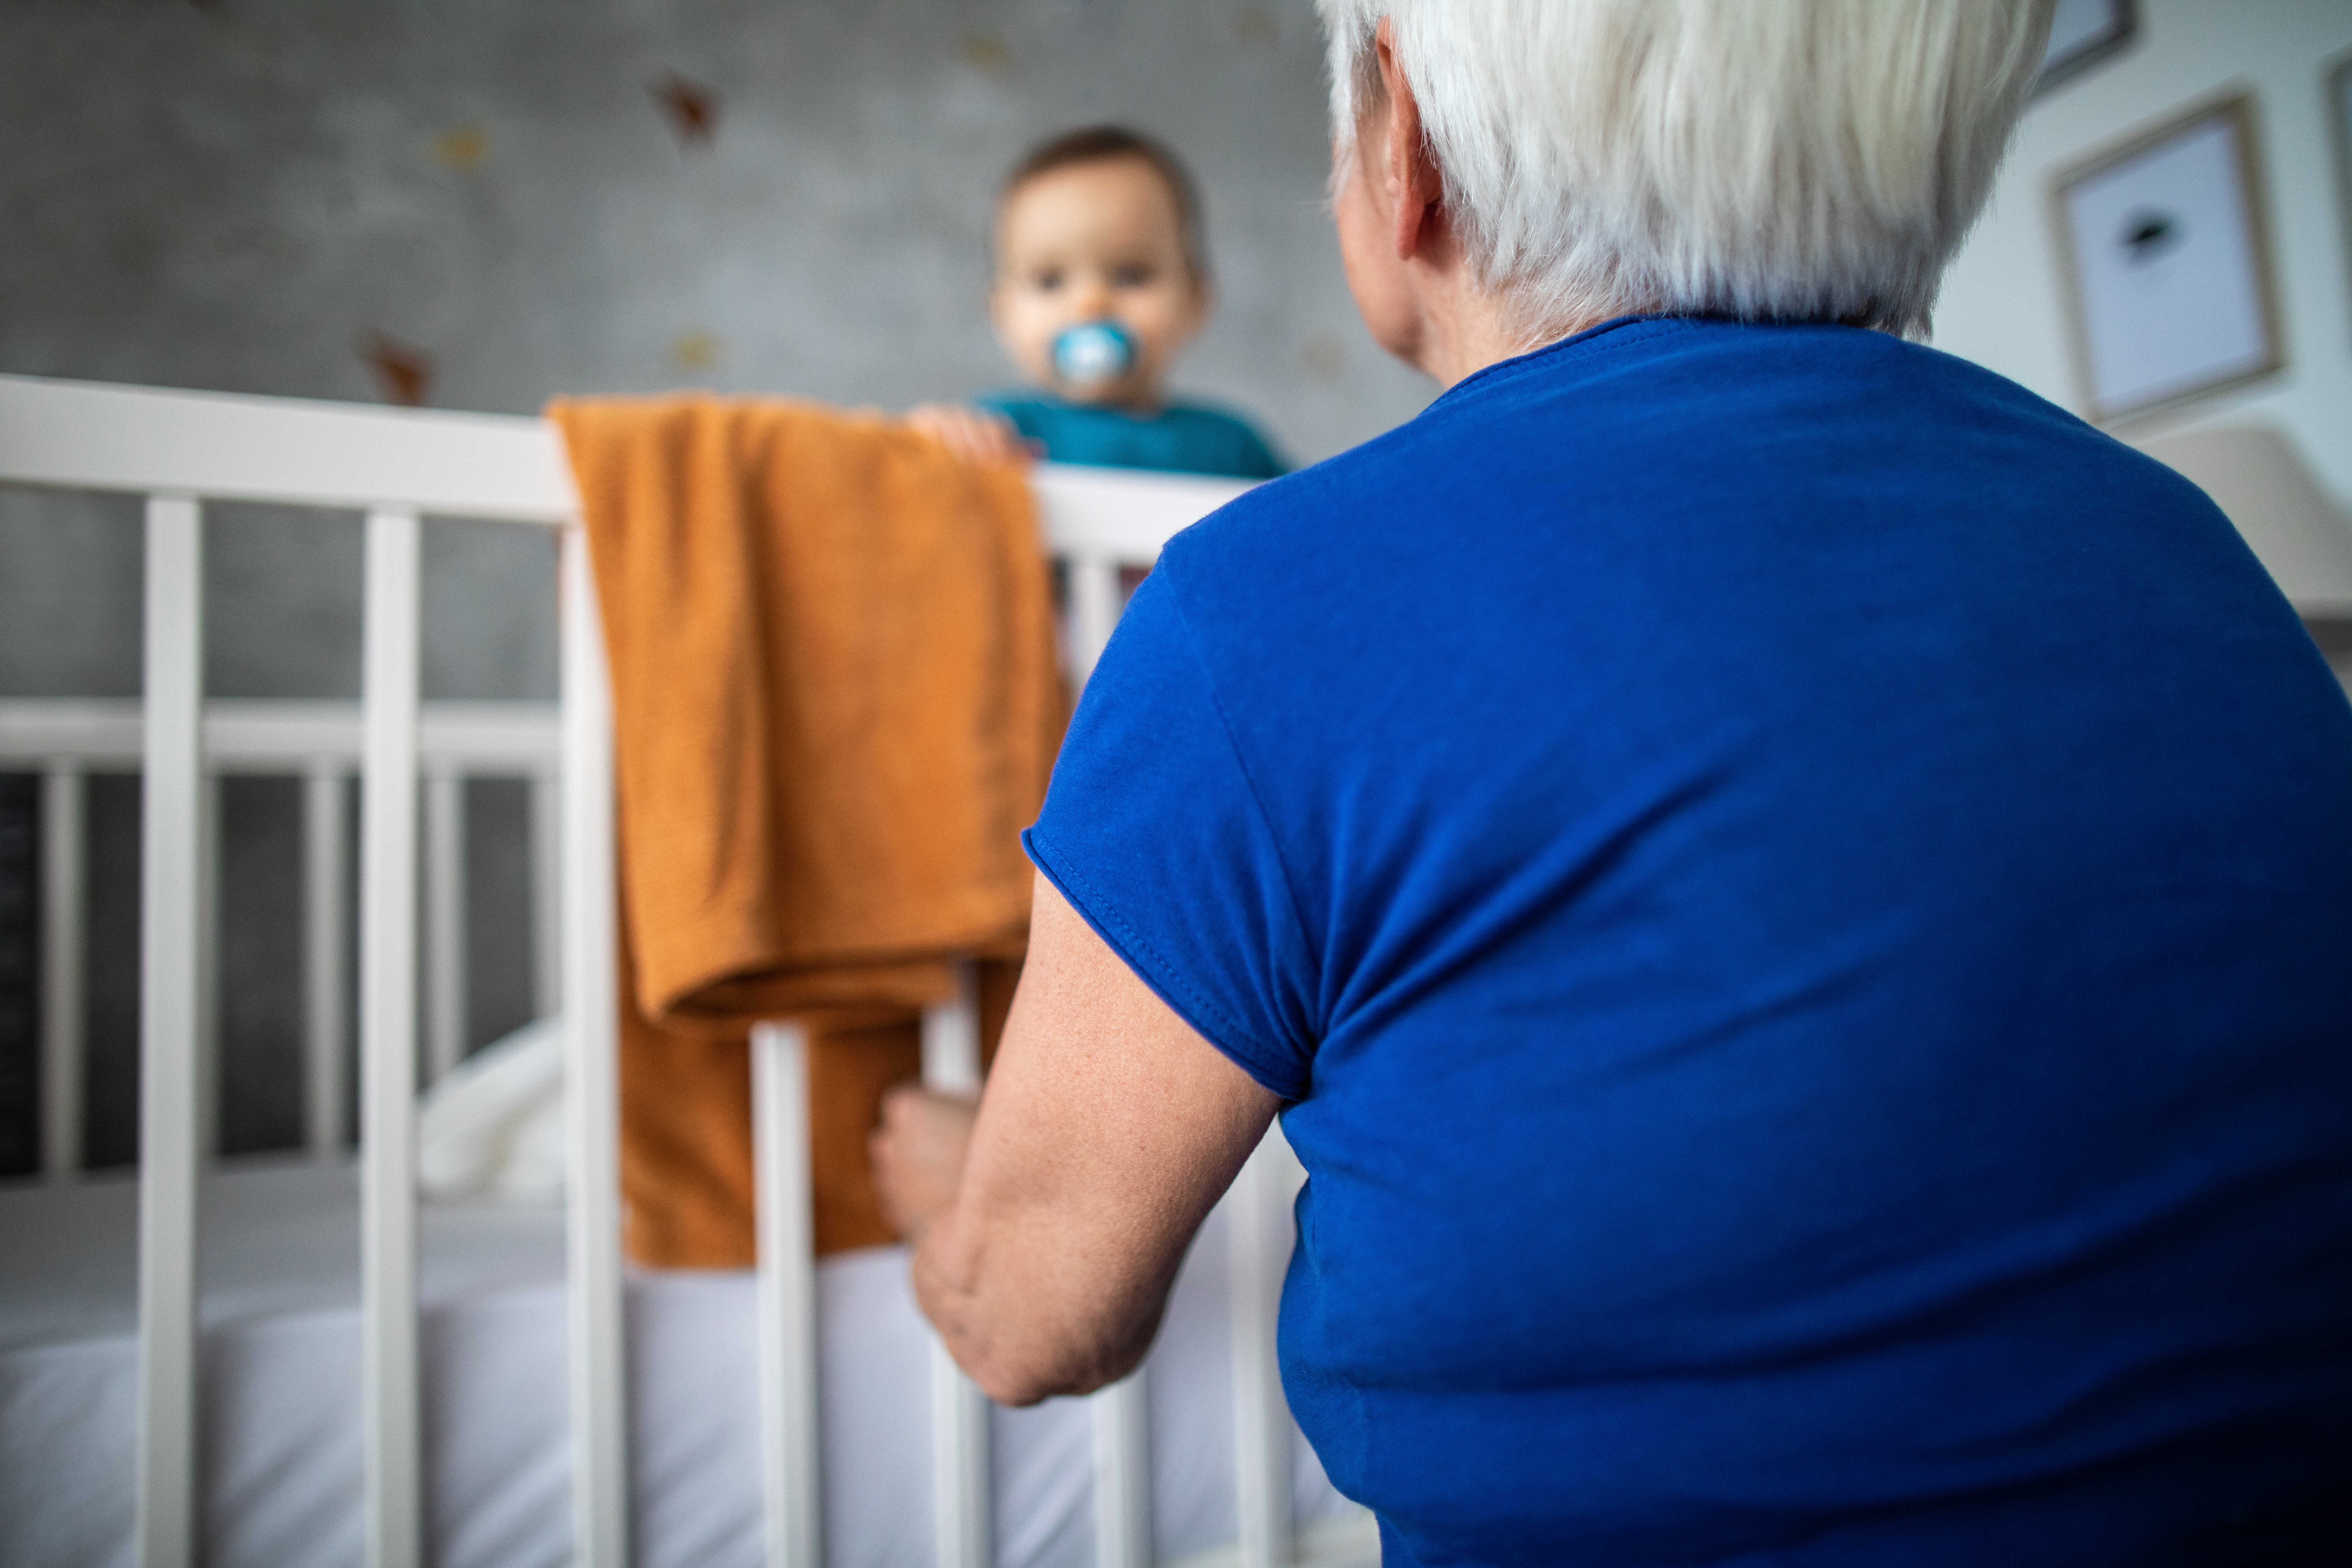 A grandmother communicating with grandson in the crib in a nursery room | Source: Getty Images